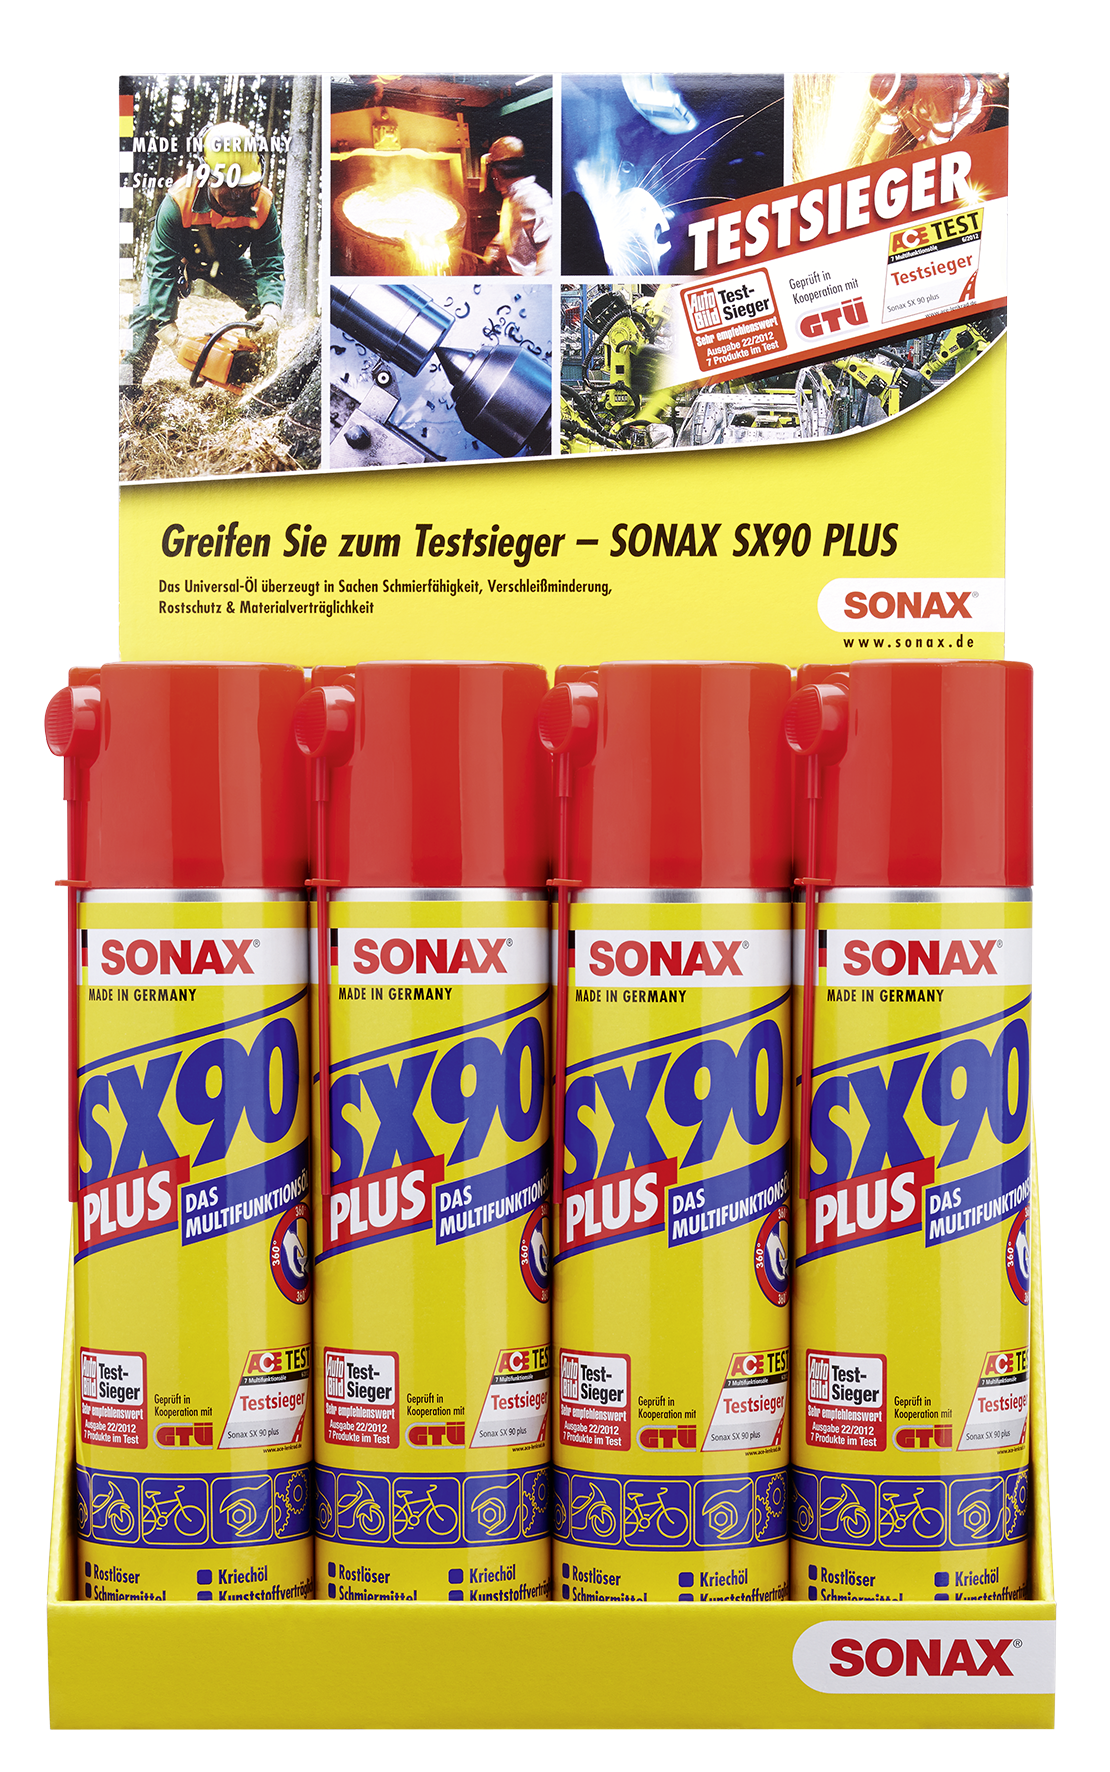 Product image download - SONAX Media - site 5